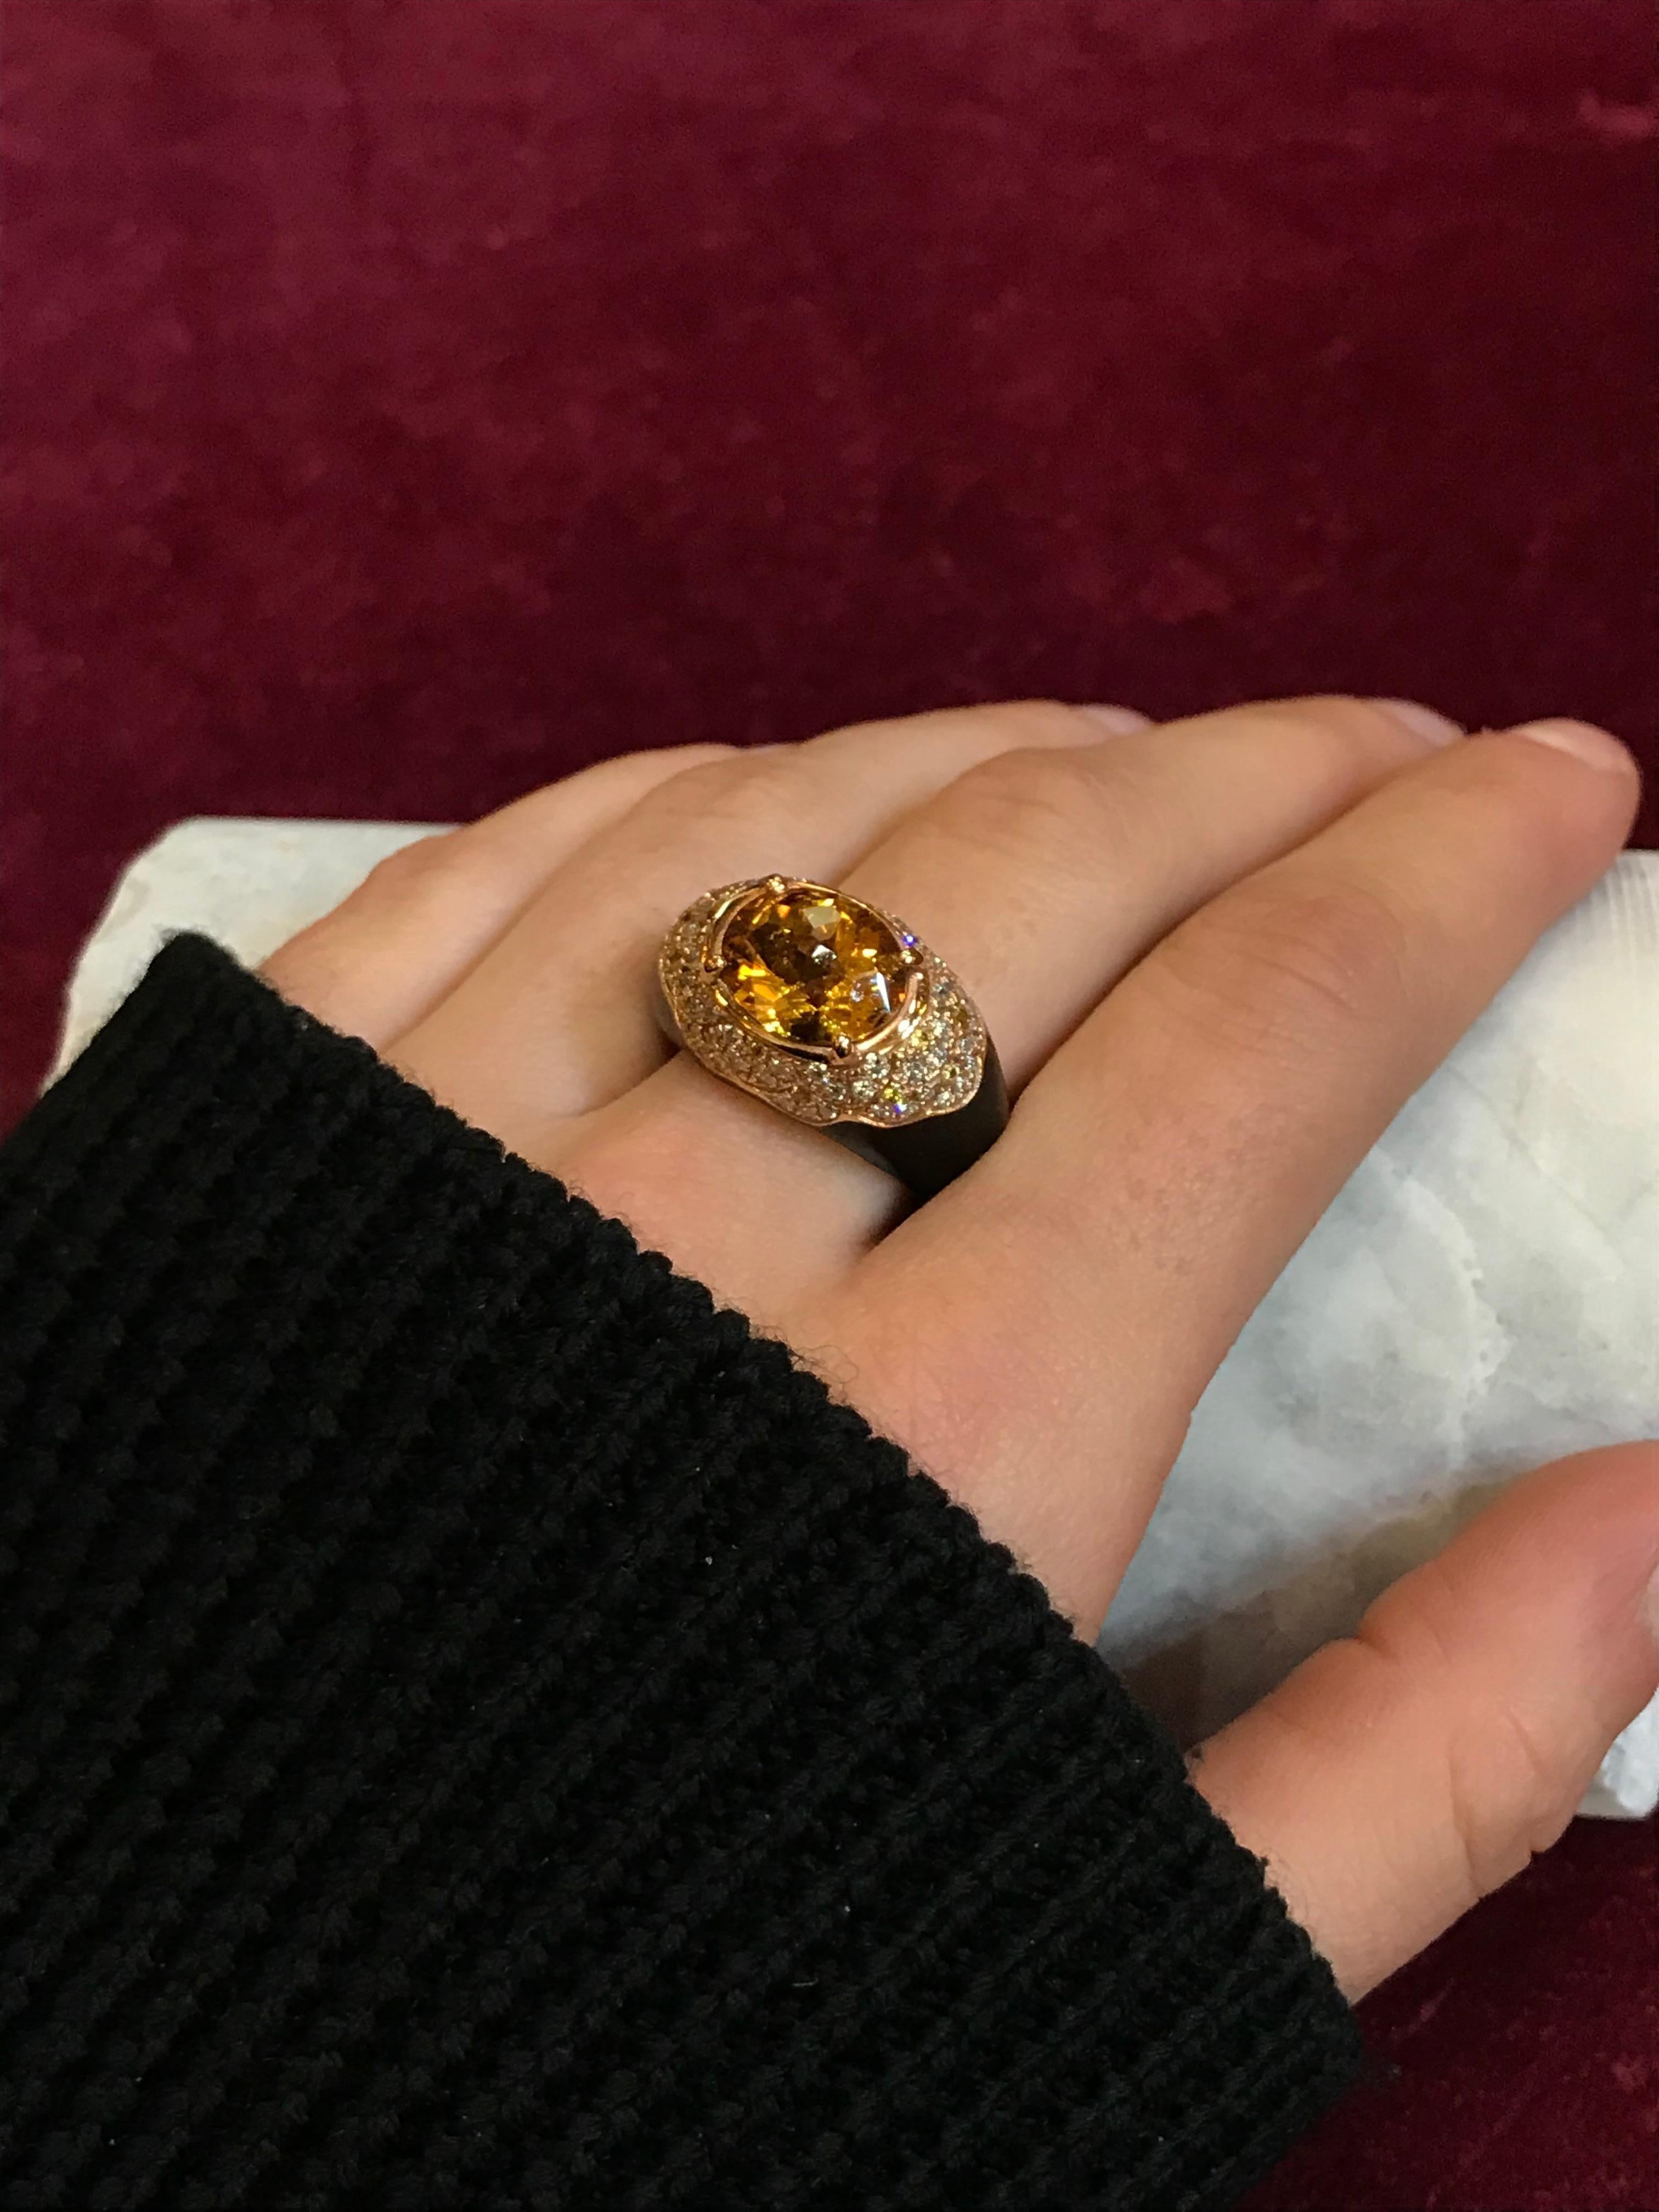 - Handmade in our 150 year old workshop South of Rome, Italy
- 18k Rose Gold 
- 4ct Hand cut Citrine
- 0,80ct White VVS-F Diamonds
- Hand set pave Yellow Sapphires
Video available please message Gabriella (via Contact Seller button) to view.

Hand